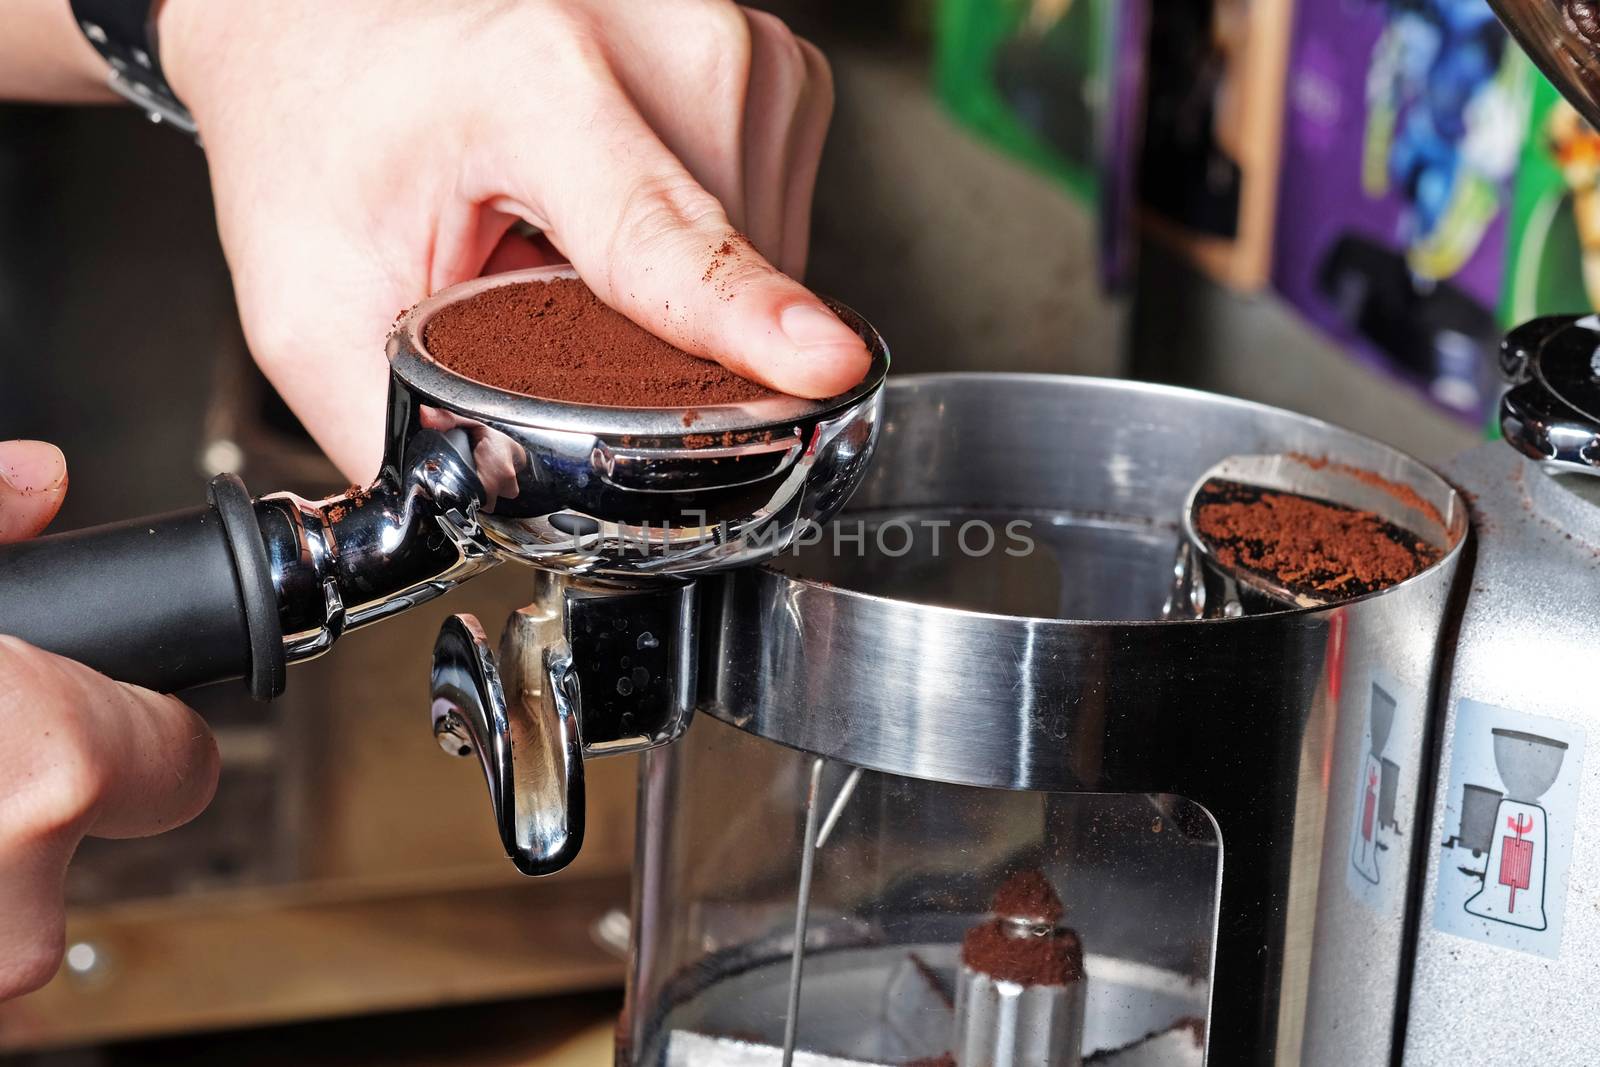 Barista compresses coffee grounds with tamper by Surasak